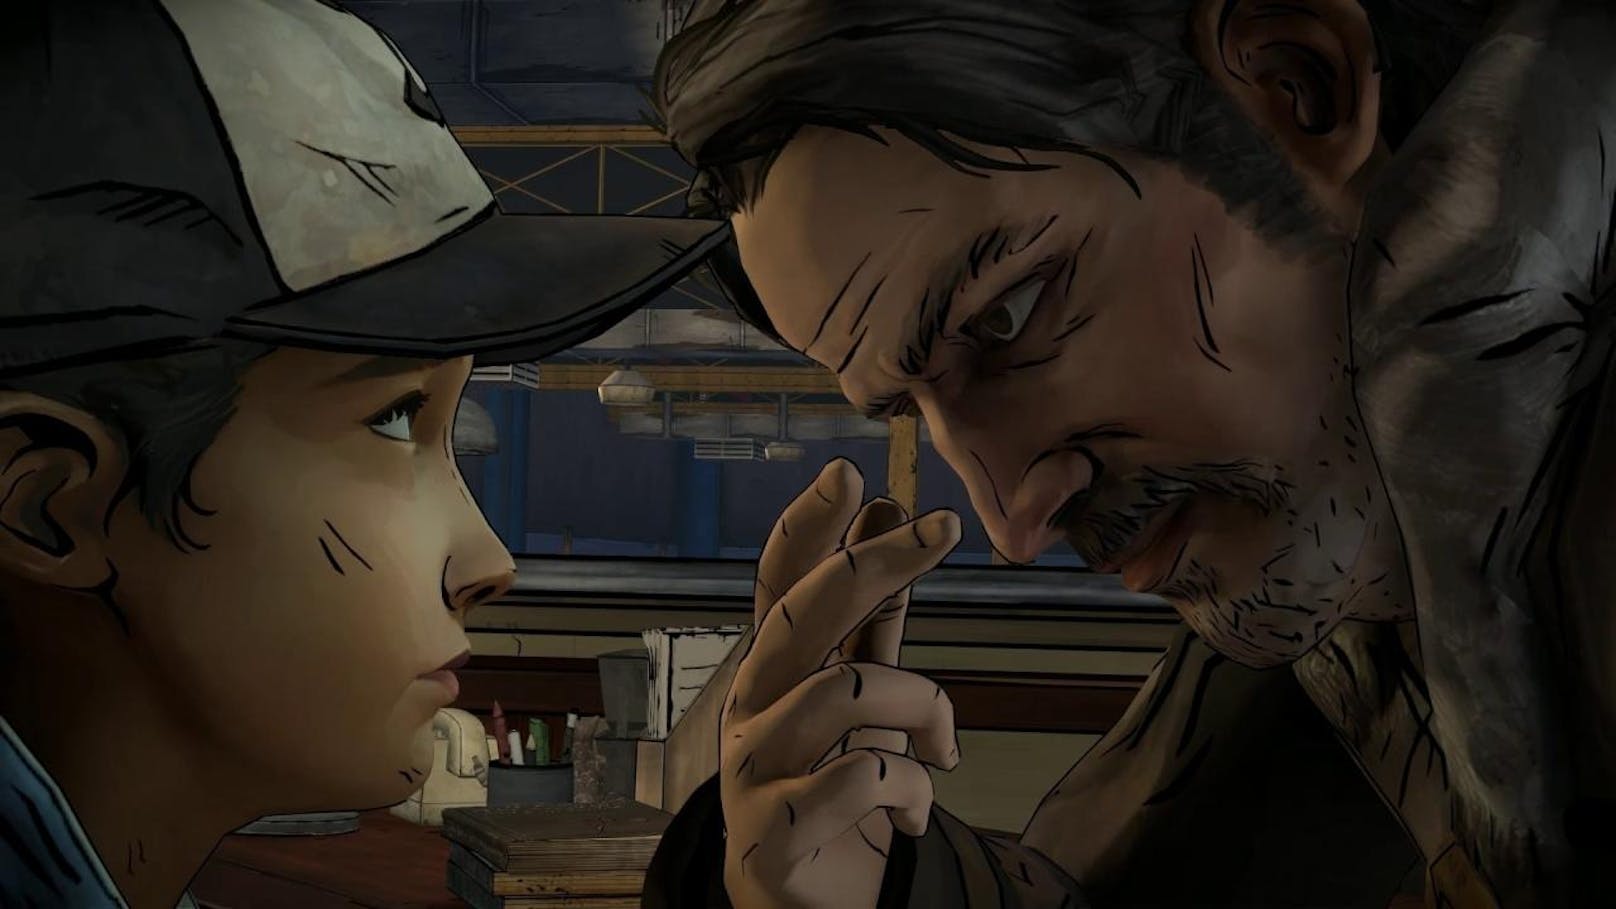  <a href="https://www.heute.at/digital/games/story/The-Walking-Dead--The-Telltale-Series-Collection-54987397" target="_blank">The Walking Dead: The Telltale Series Collection</a>